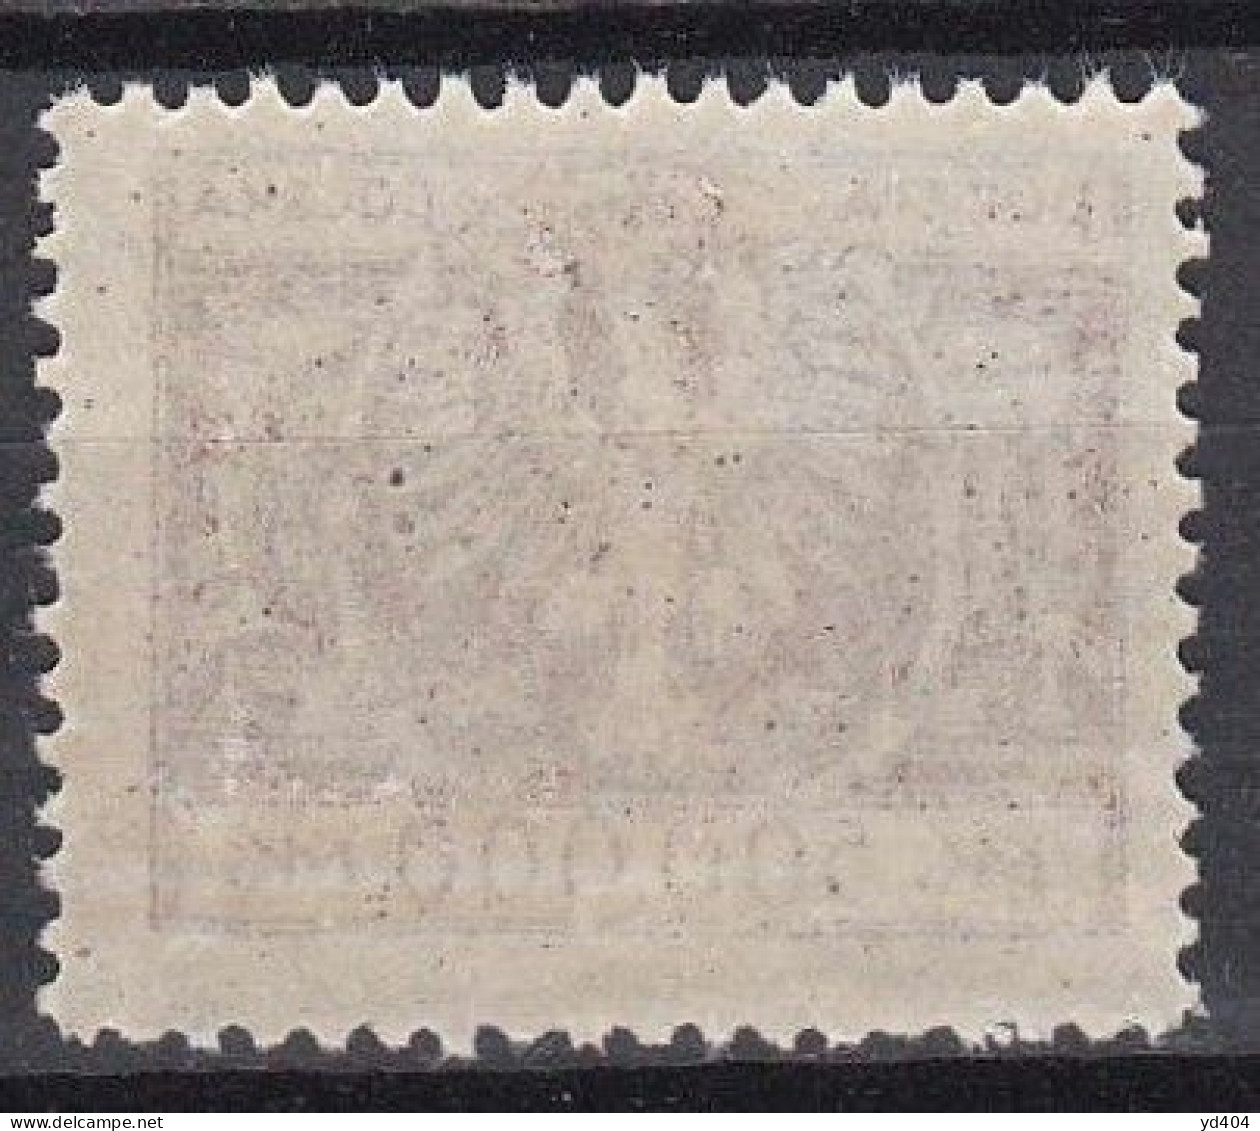 PL204 – POLOGNE - POLAND – 1924 – ARMS OF POLAND – MI # 197 MNH 10 € - Unused Stamps